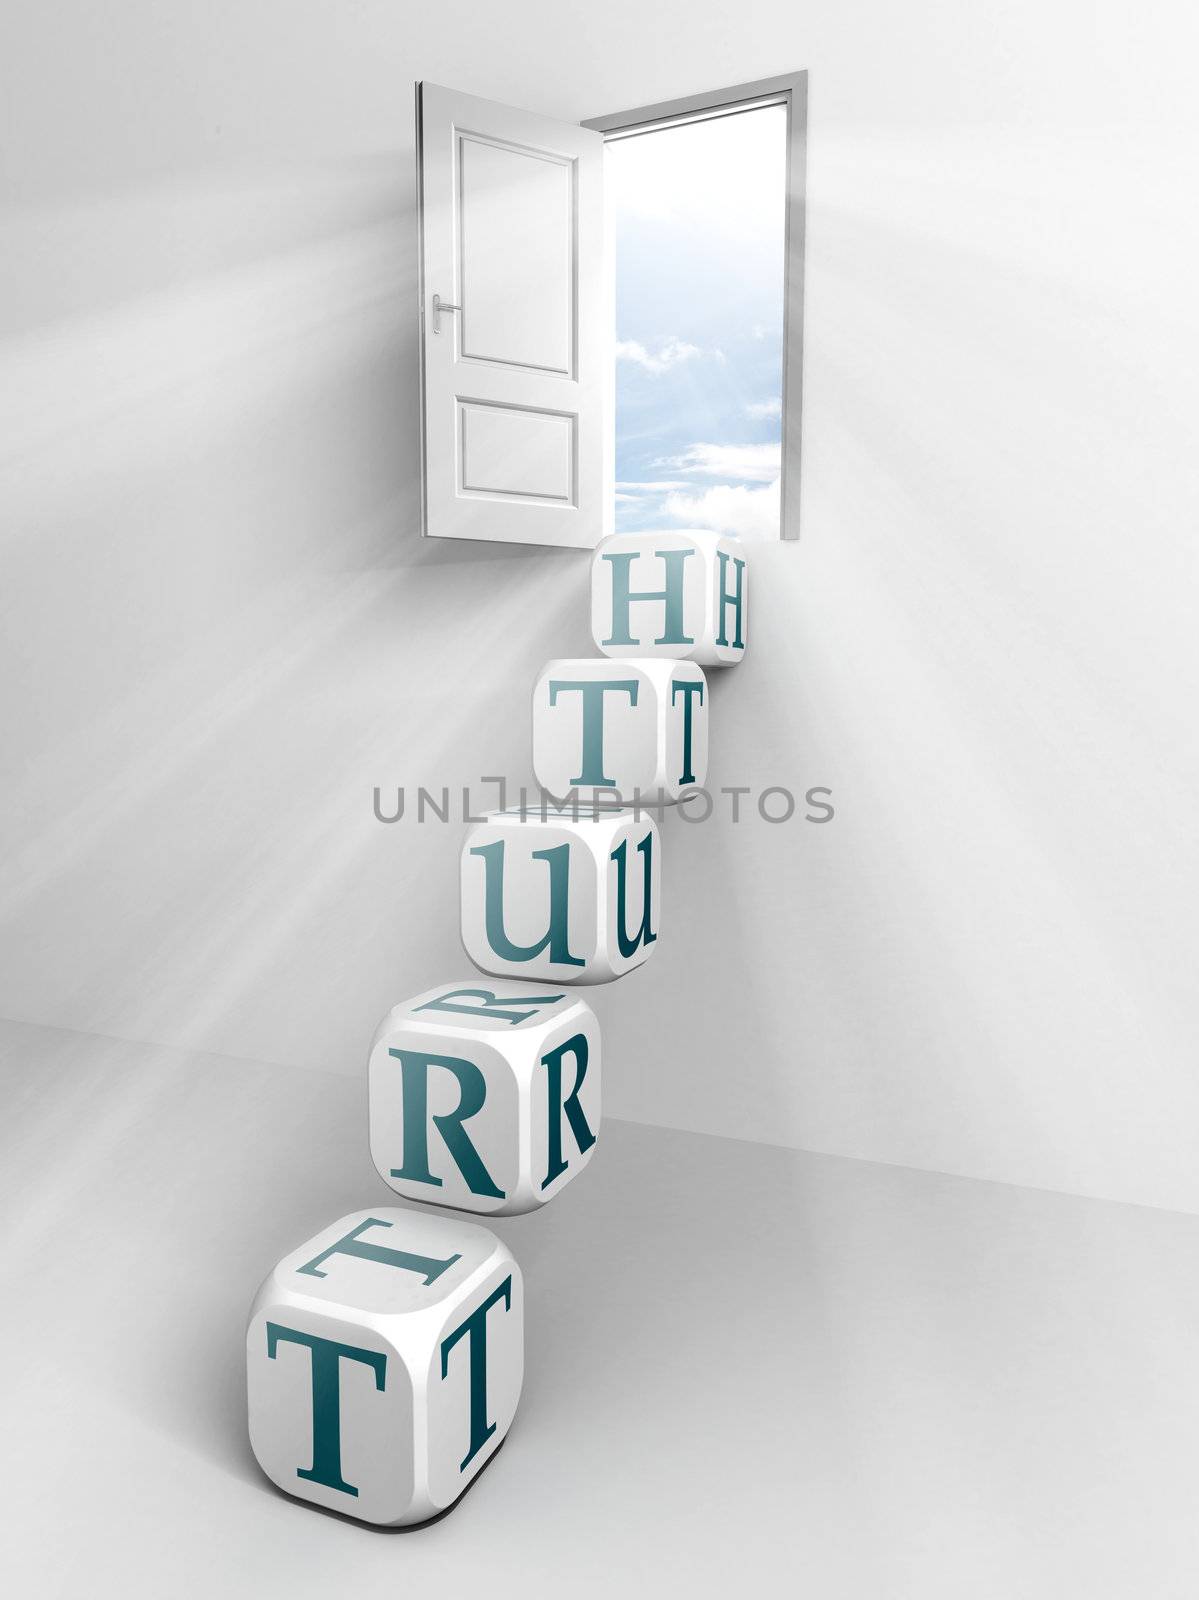 truth conceptual door and box ladder in white room 